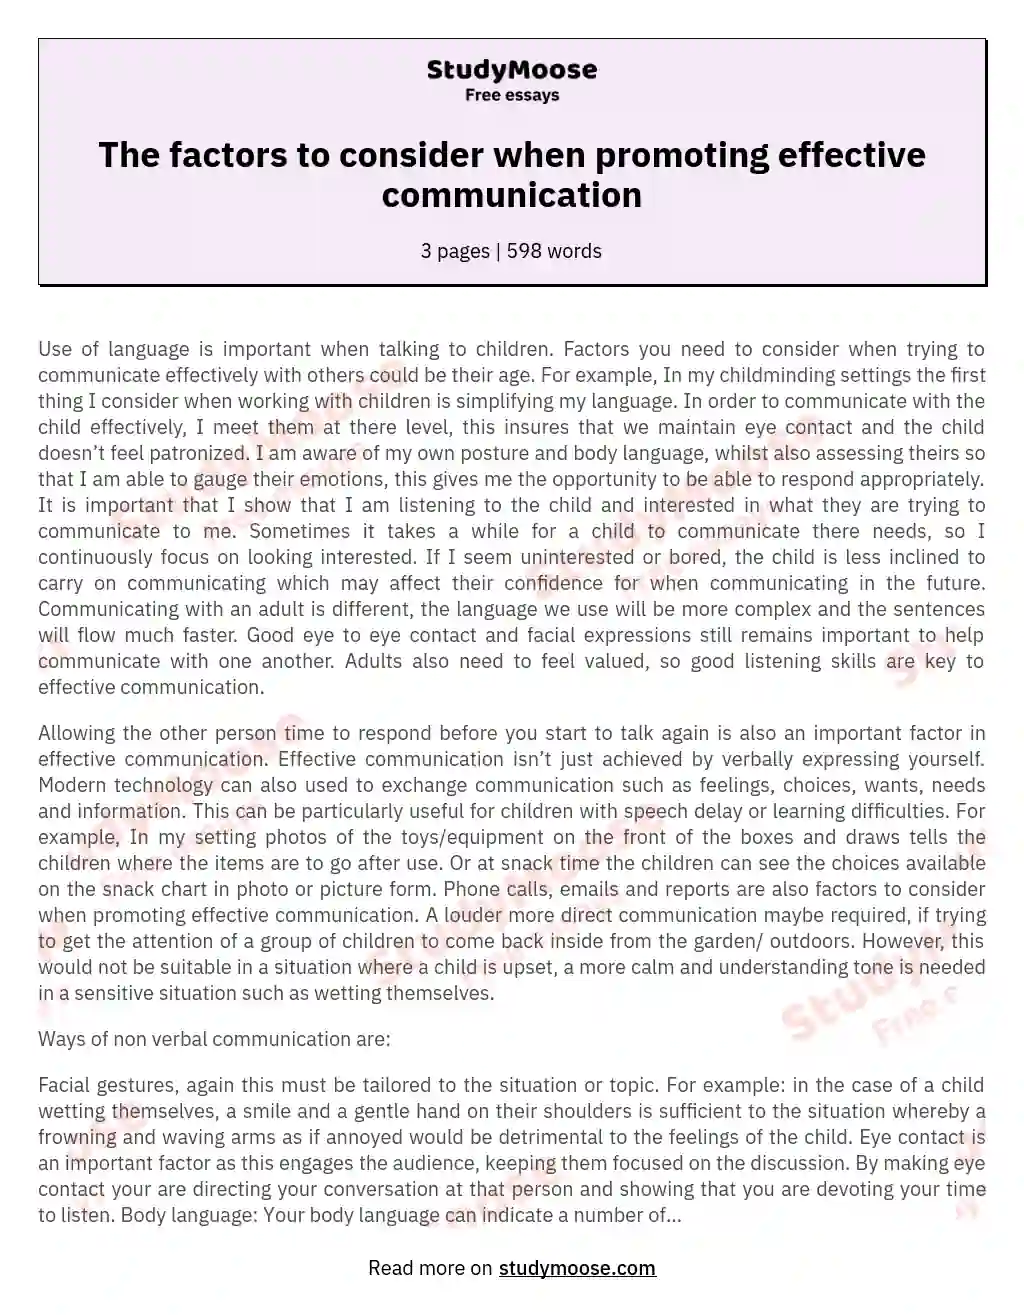 The factors to consider when promoting effective communication essay